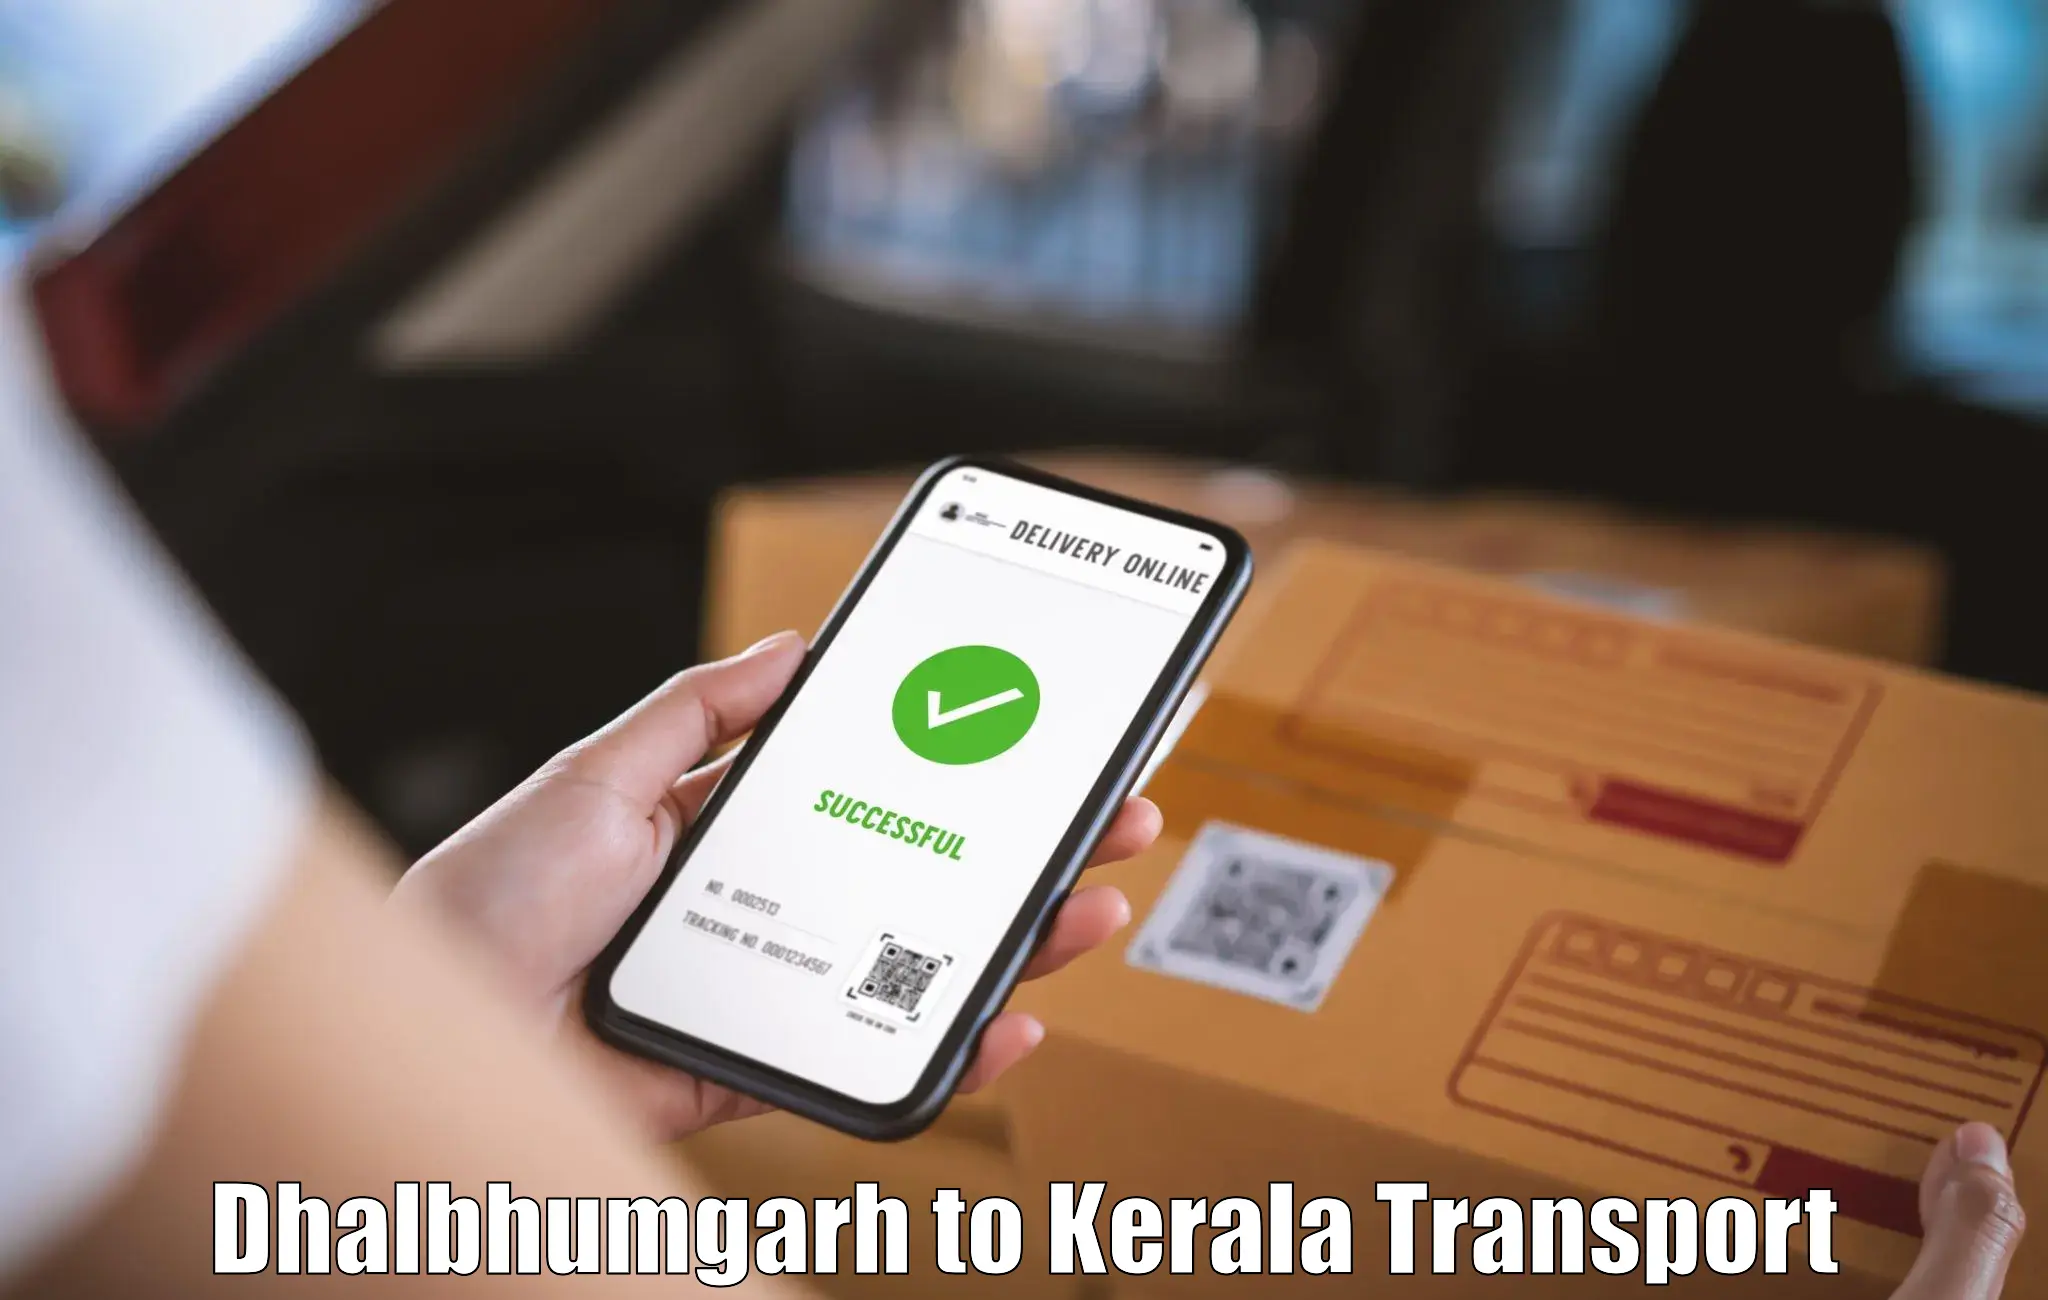 Truck transport companies in India in Dhalbhumgarh to Attingal